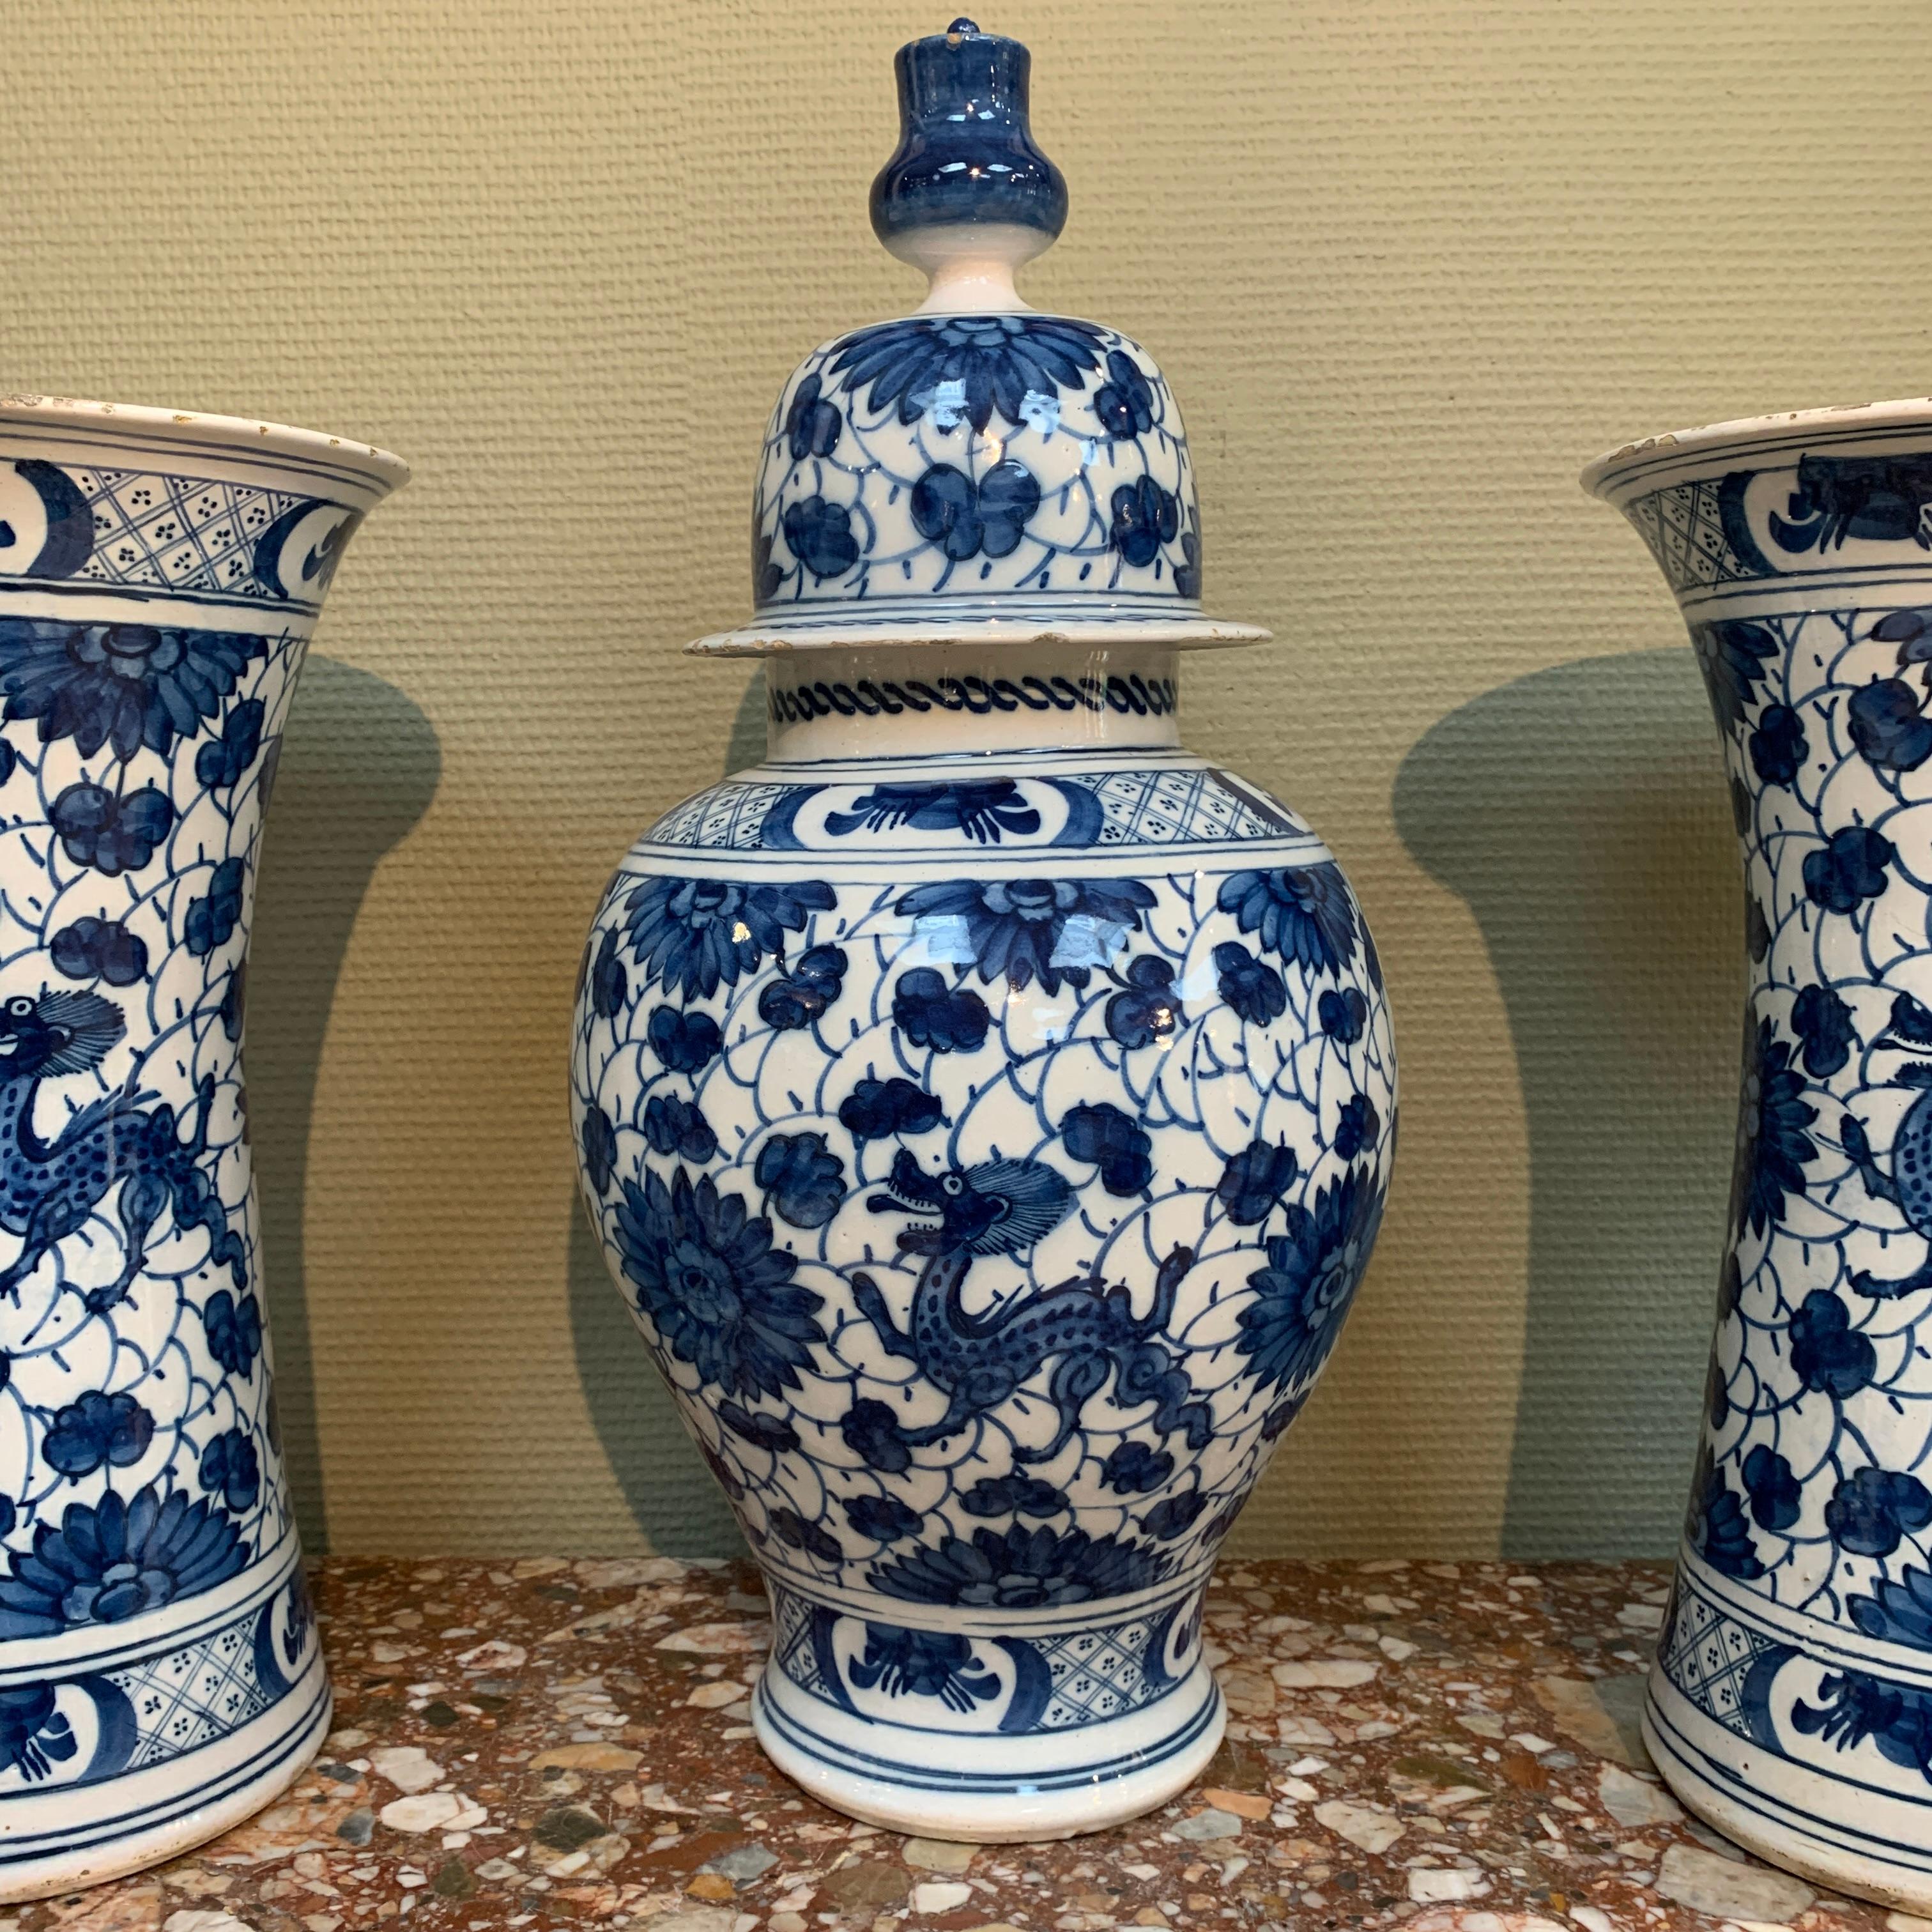 Glazed Rare and Large Dutch Delft Dragons Three Piece Garniture Vases Set, Early 18th C